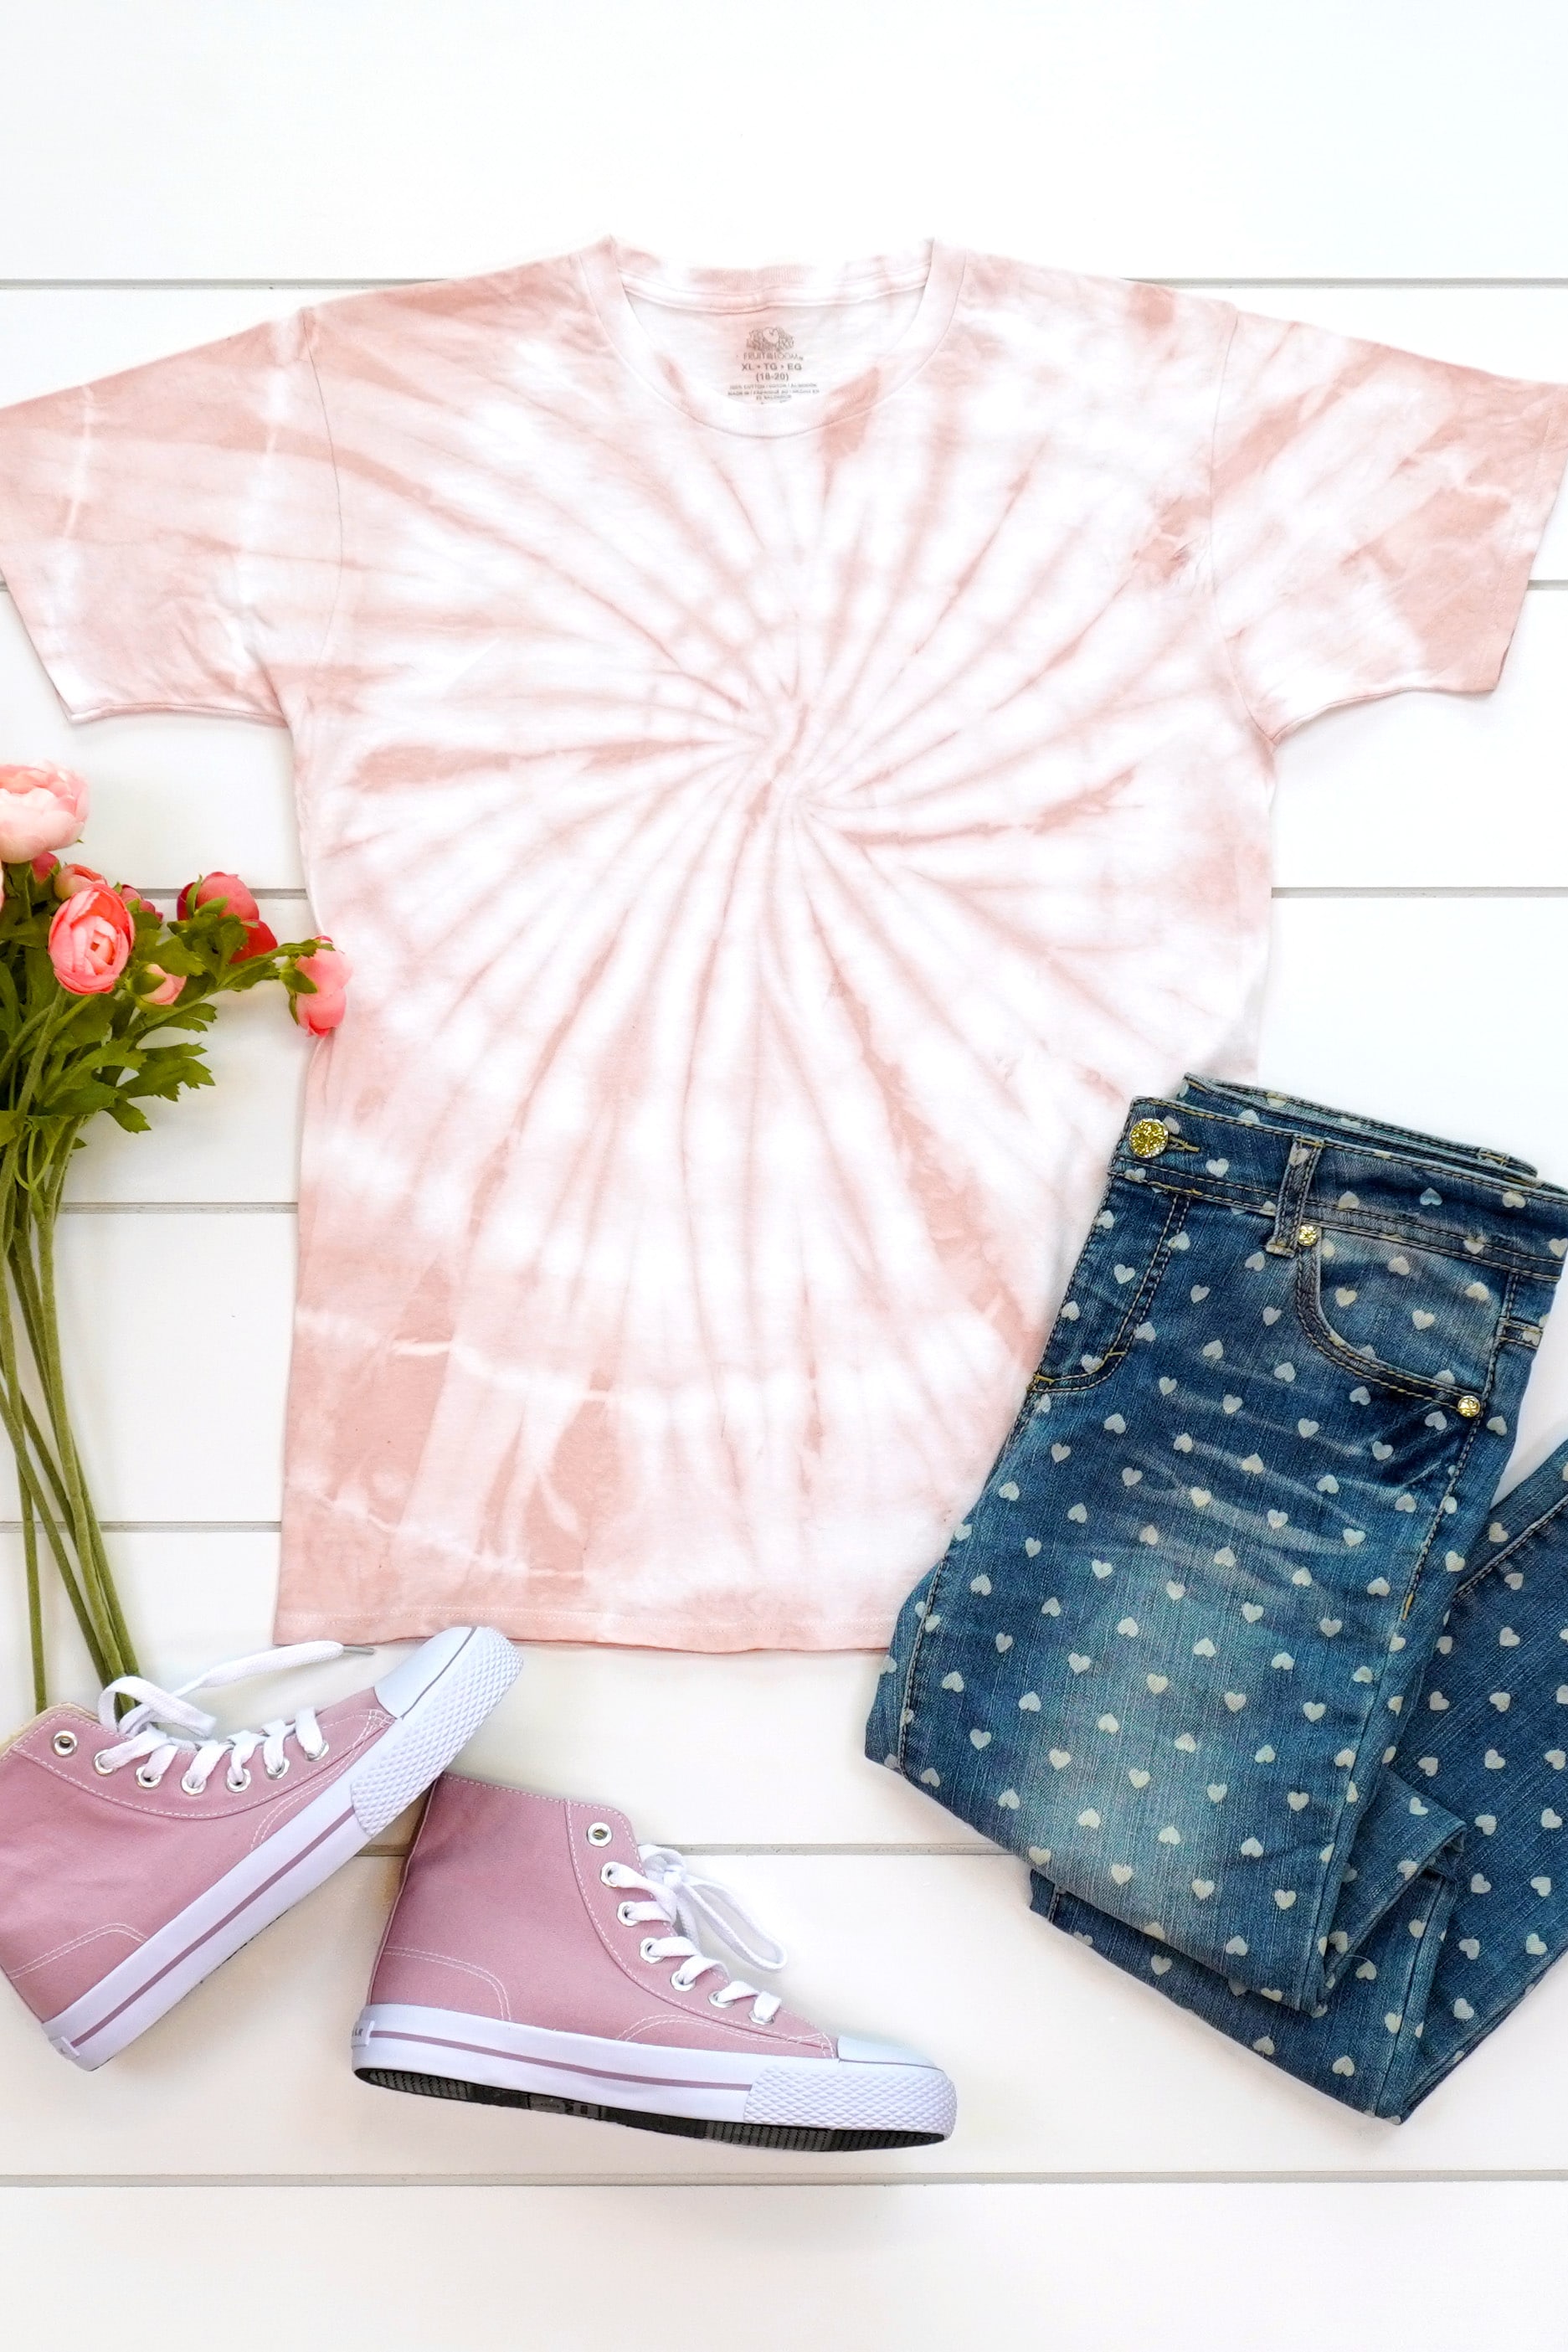 Blush pink spiral tie-dyed shirt made with avocado dye staged with an outfit and flowers on a white background